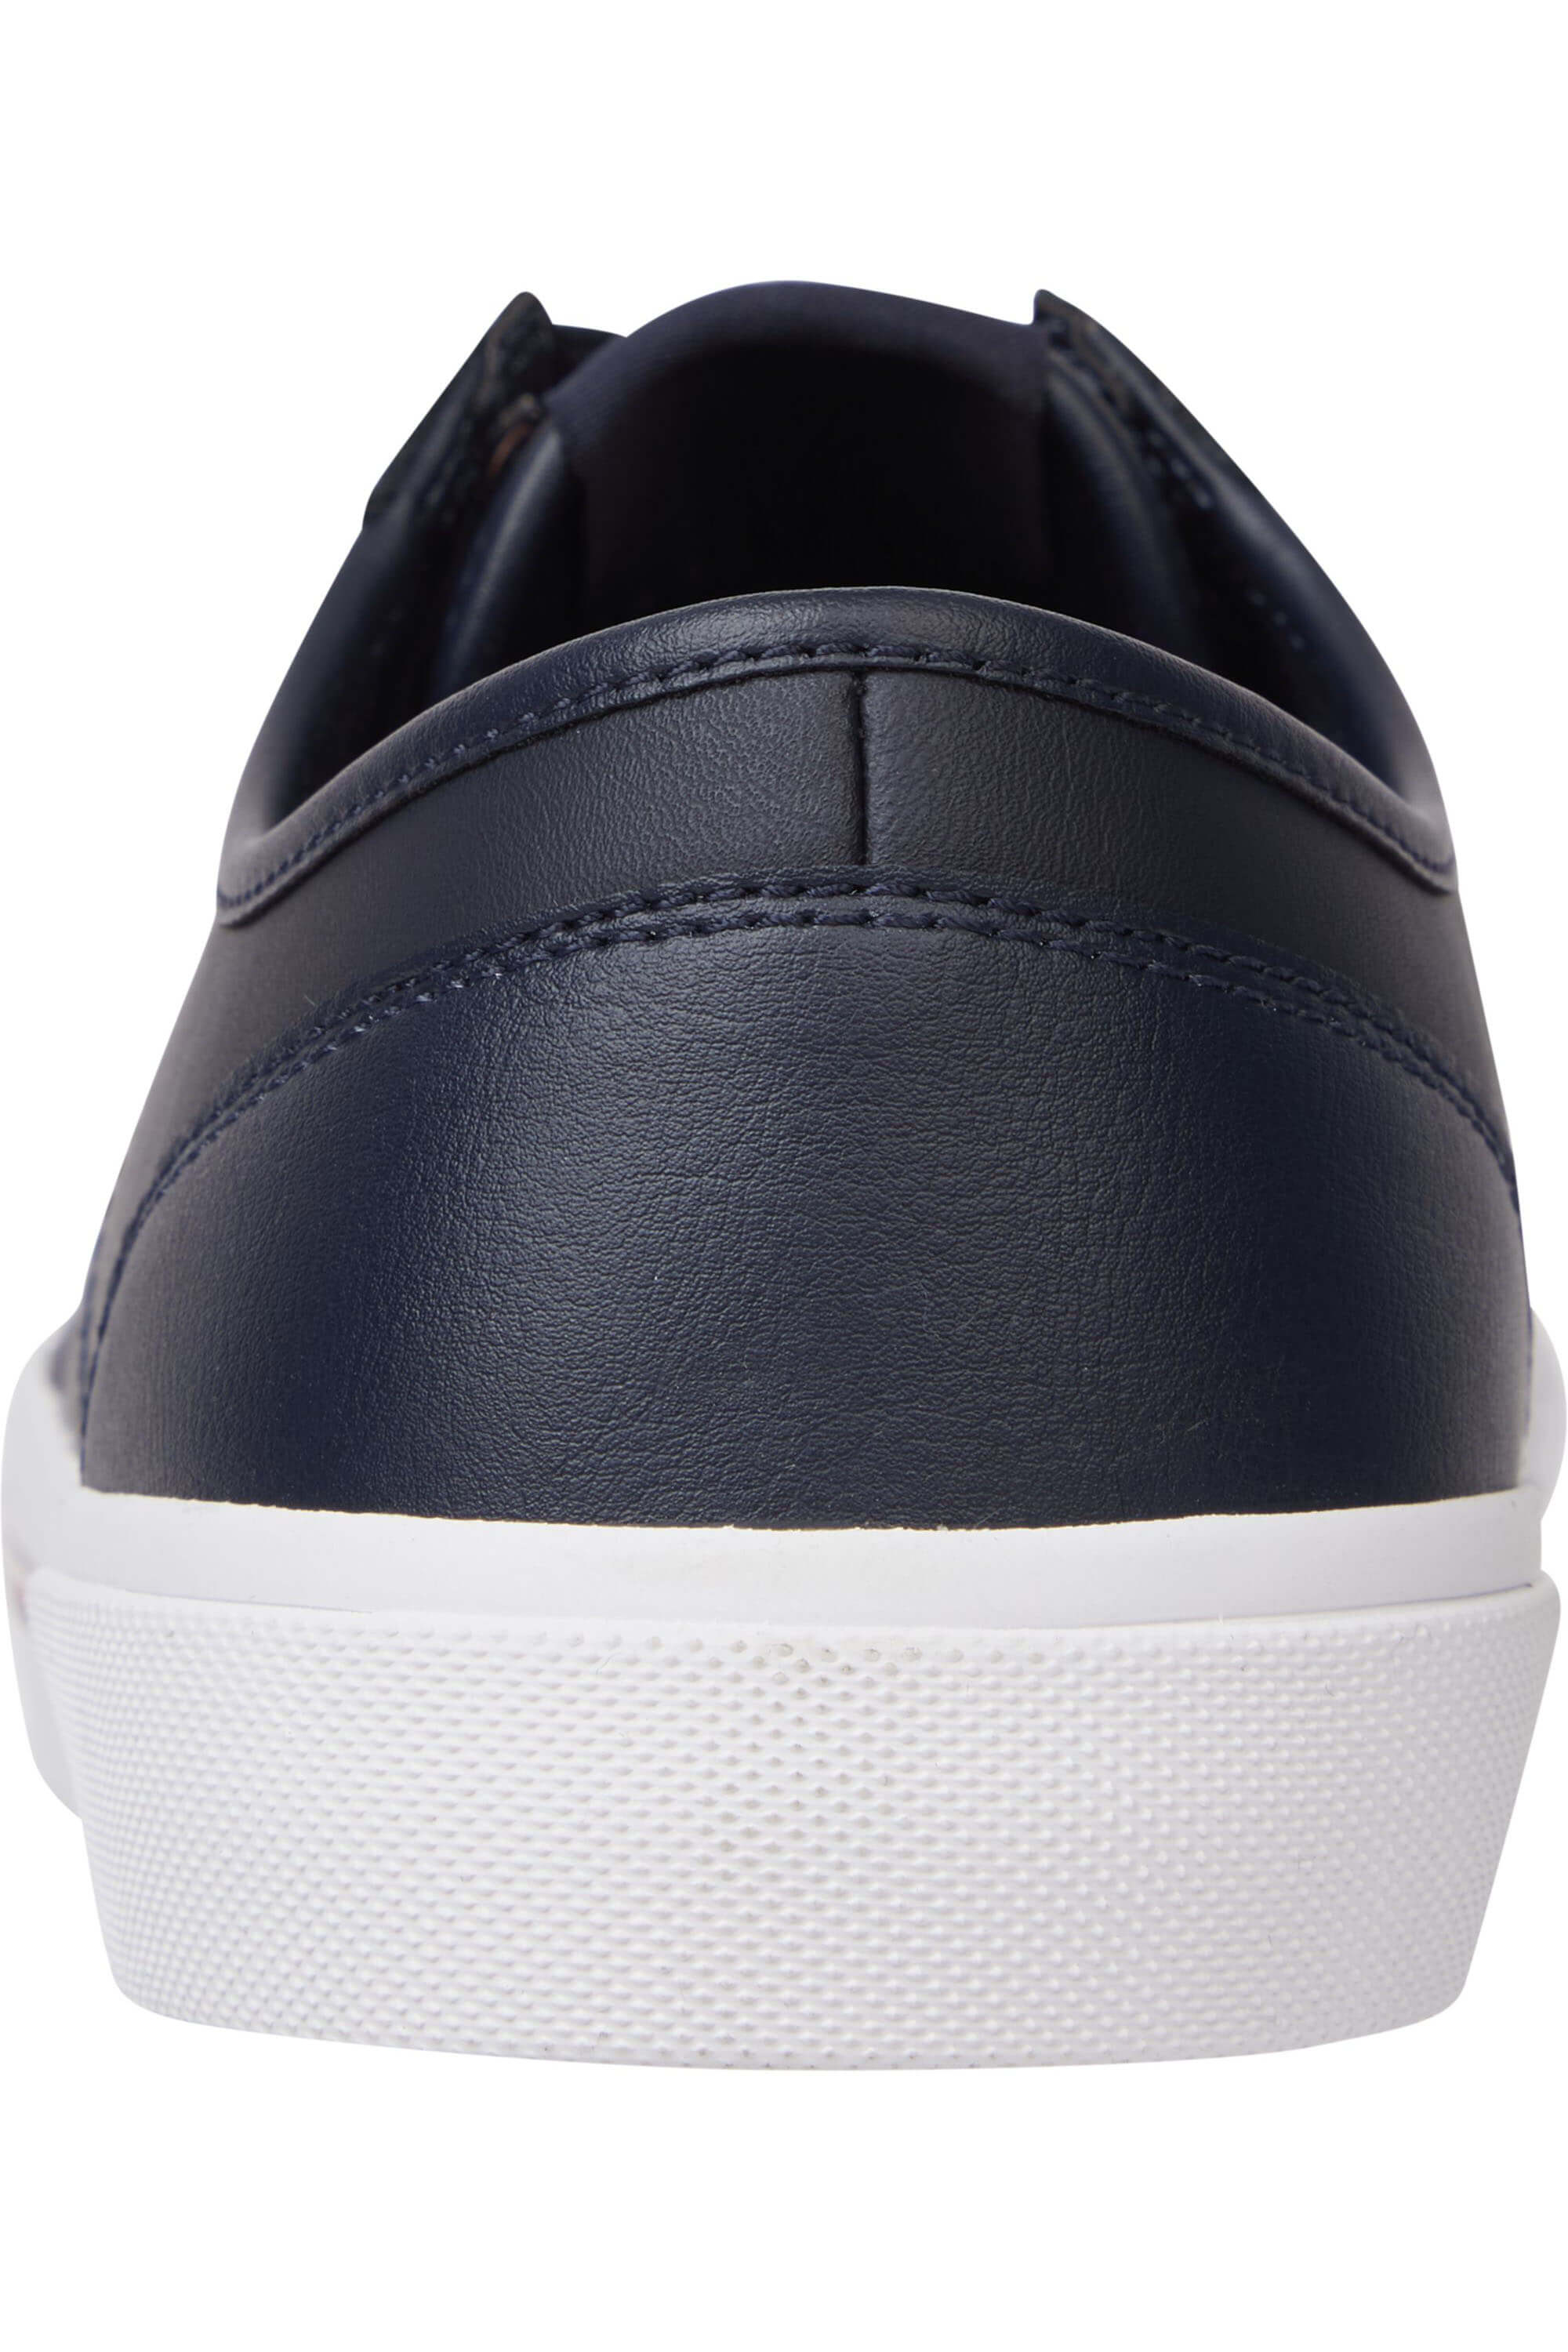 Tommy Hilfiger Core Corporate Leather Trainer Navy